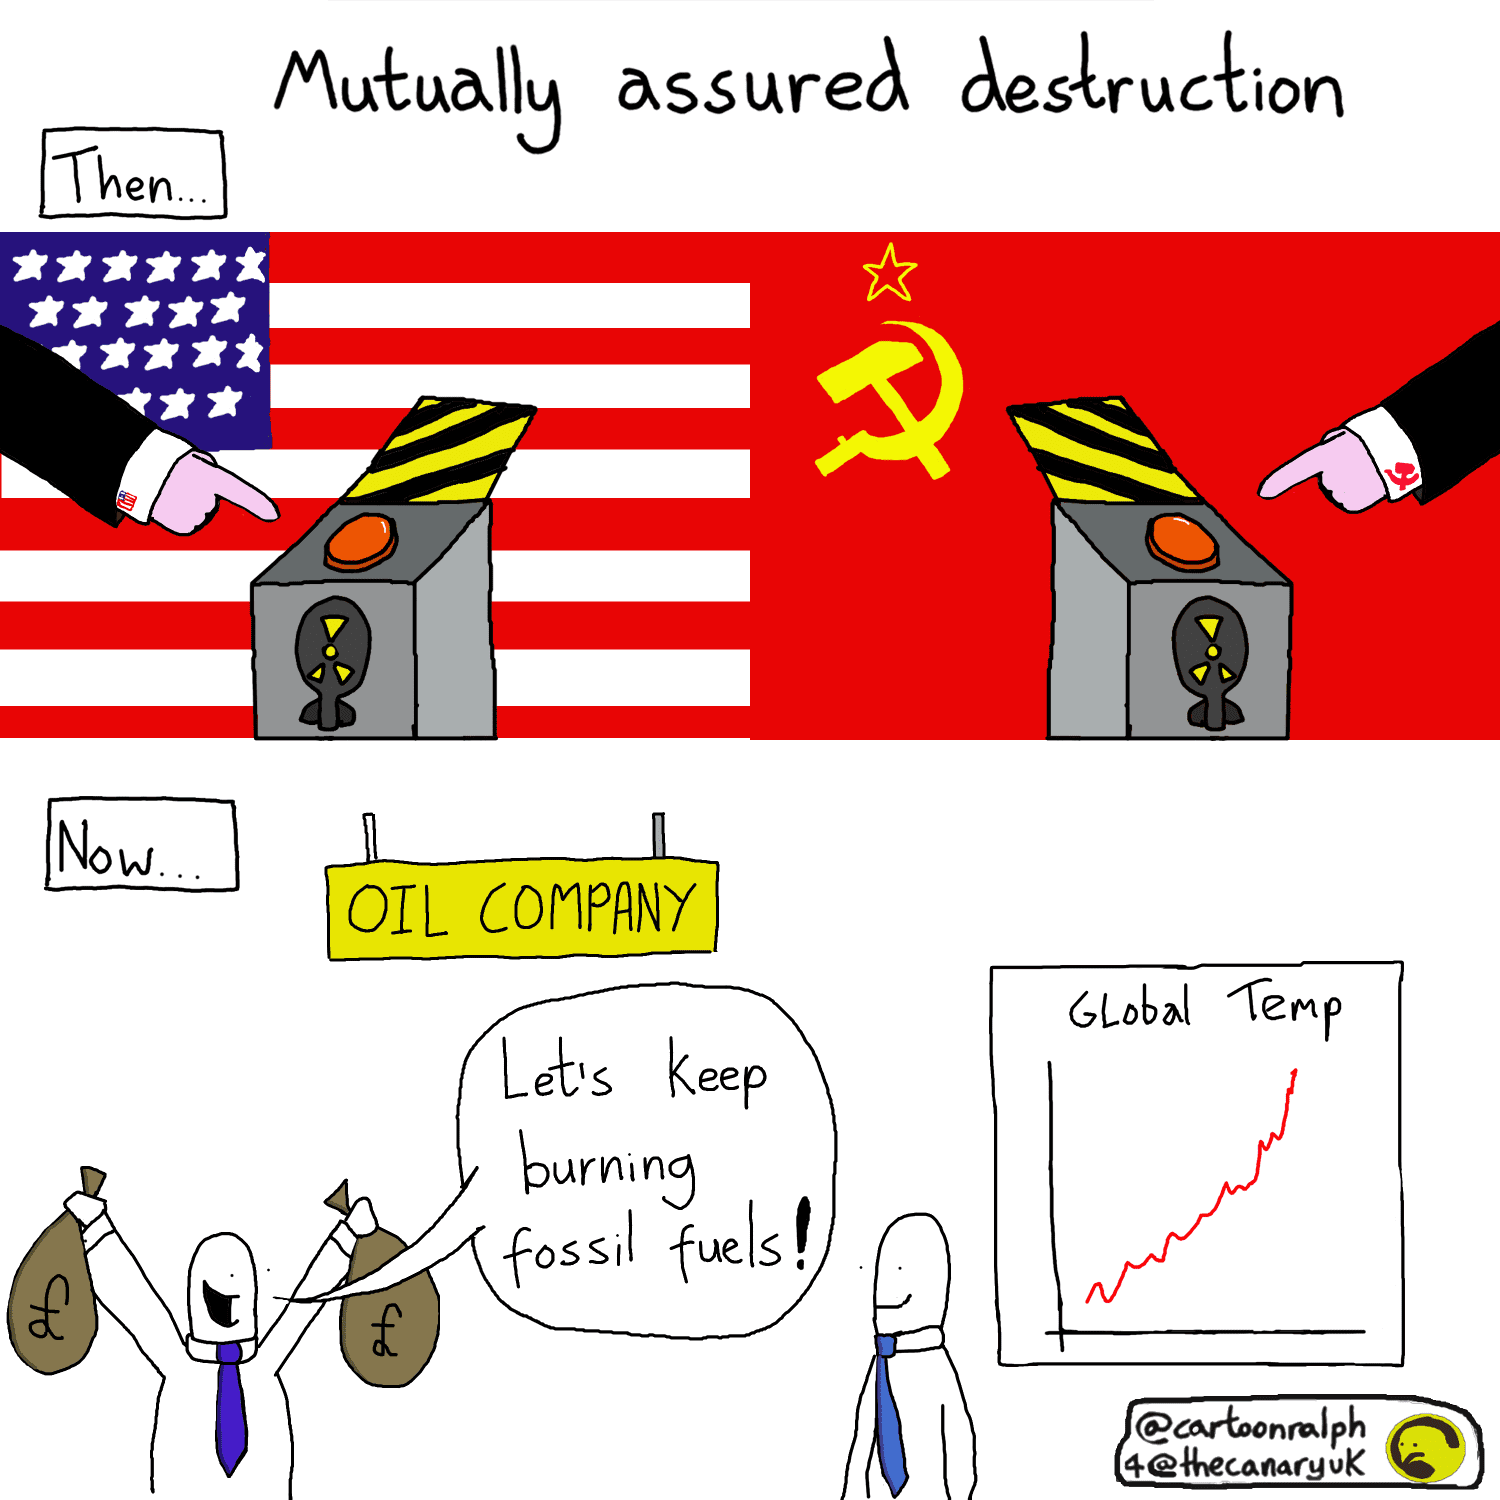 A cartoon with the title "mutually assured destruction". The first image is of two separate fingers on nuclear red buttons, one with the US flag behind it, the other with the USSR flag behind it, and both titled "the". The second image is of a person from an oil company holding a bag of cash, who is saying "let's keep burning fossil fuels". Another person is standing next to them, smiling - while a graph shows the global temperature exponentially going up. 